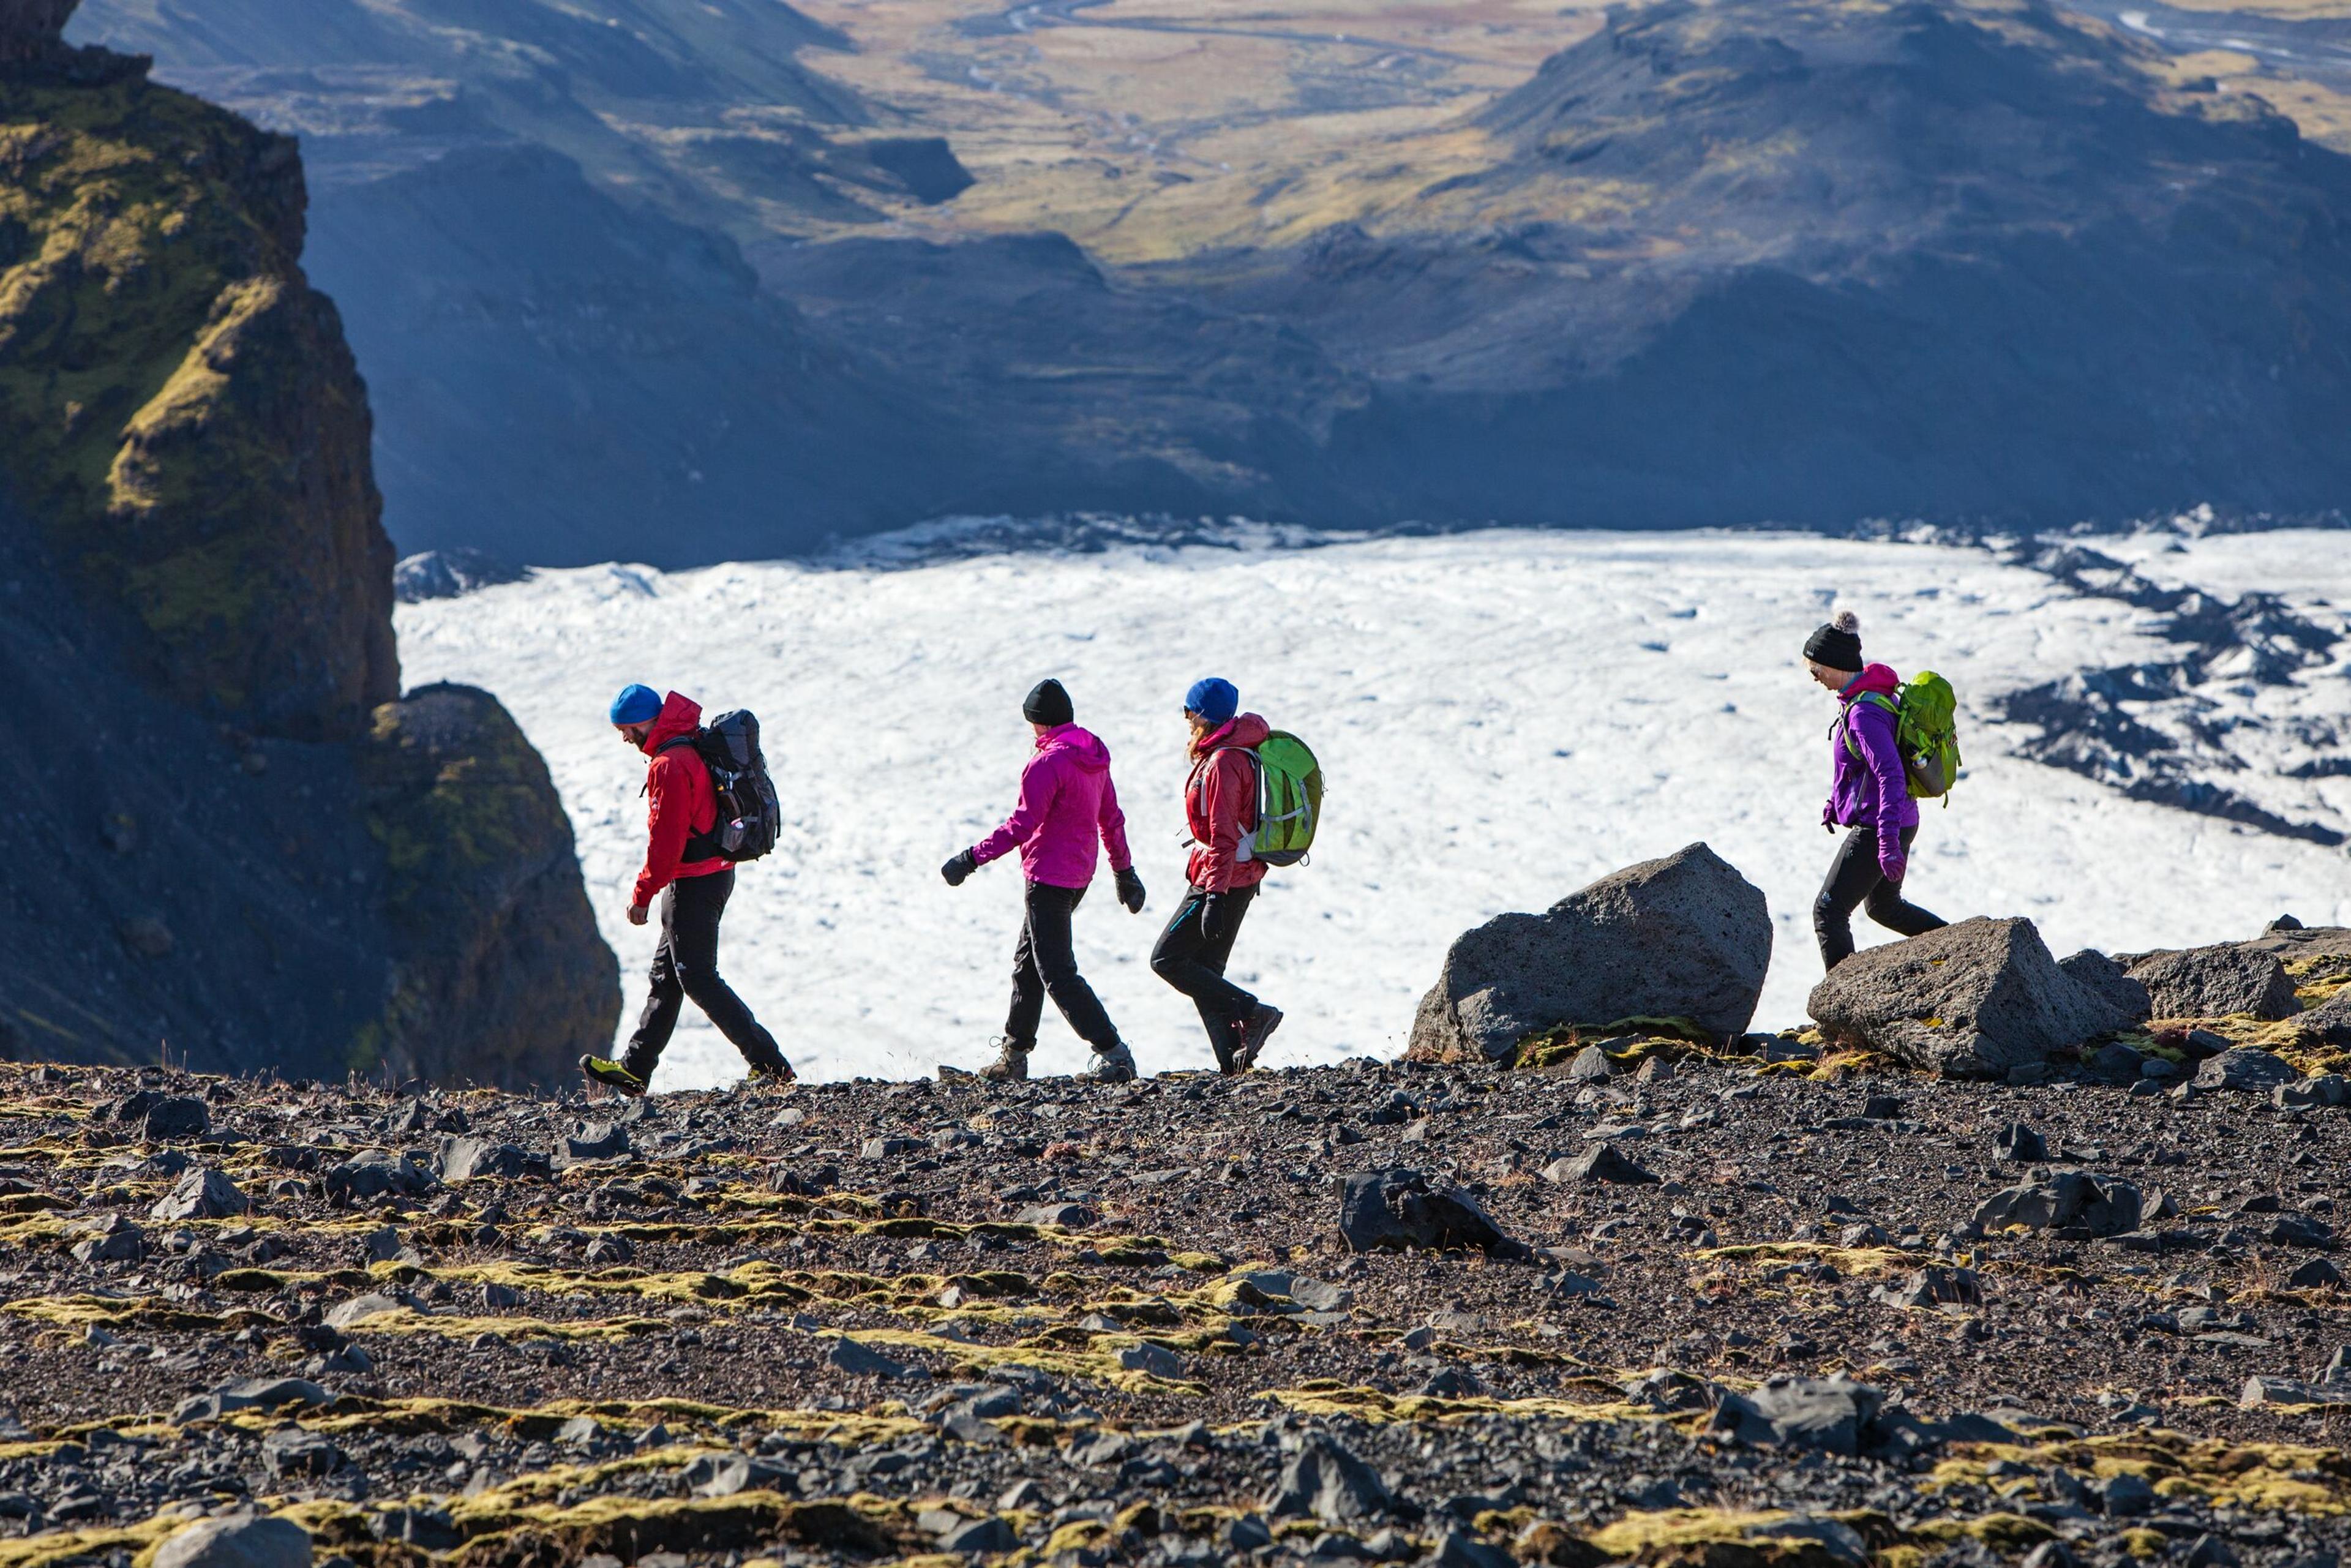 Hikers on a mountain path near the Sólheimajökull Glacier in the south coast of Iceland.